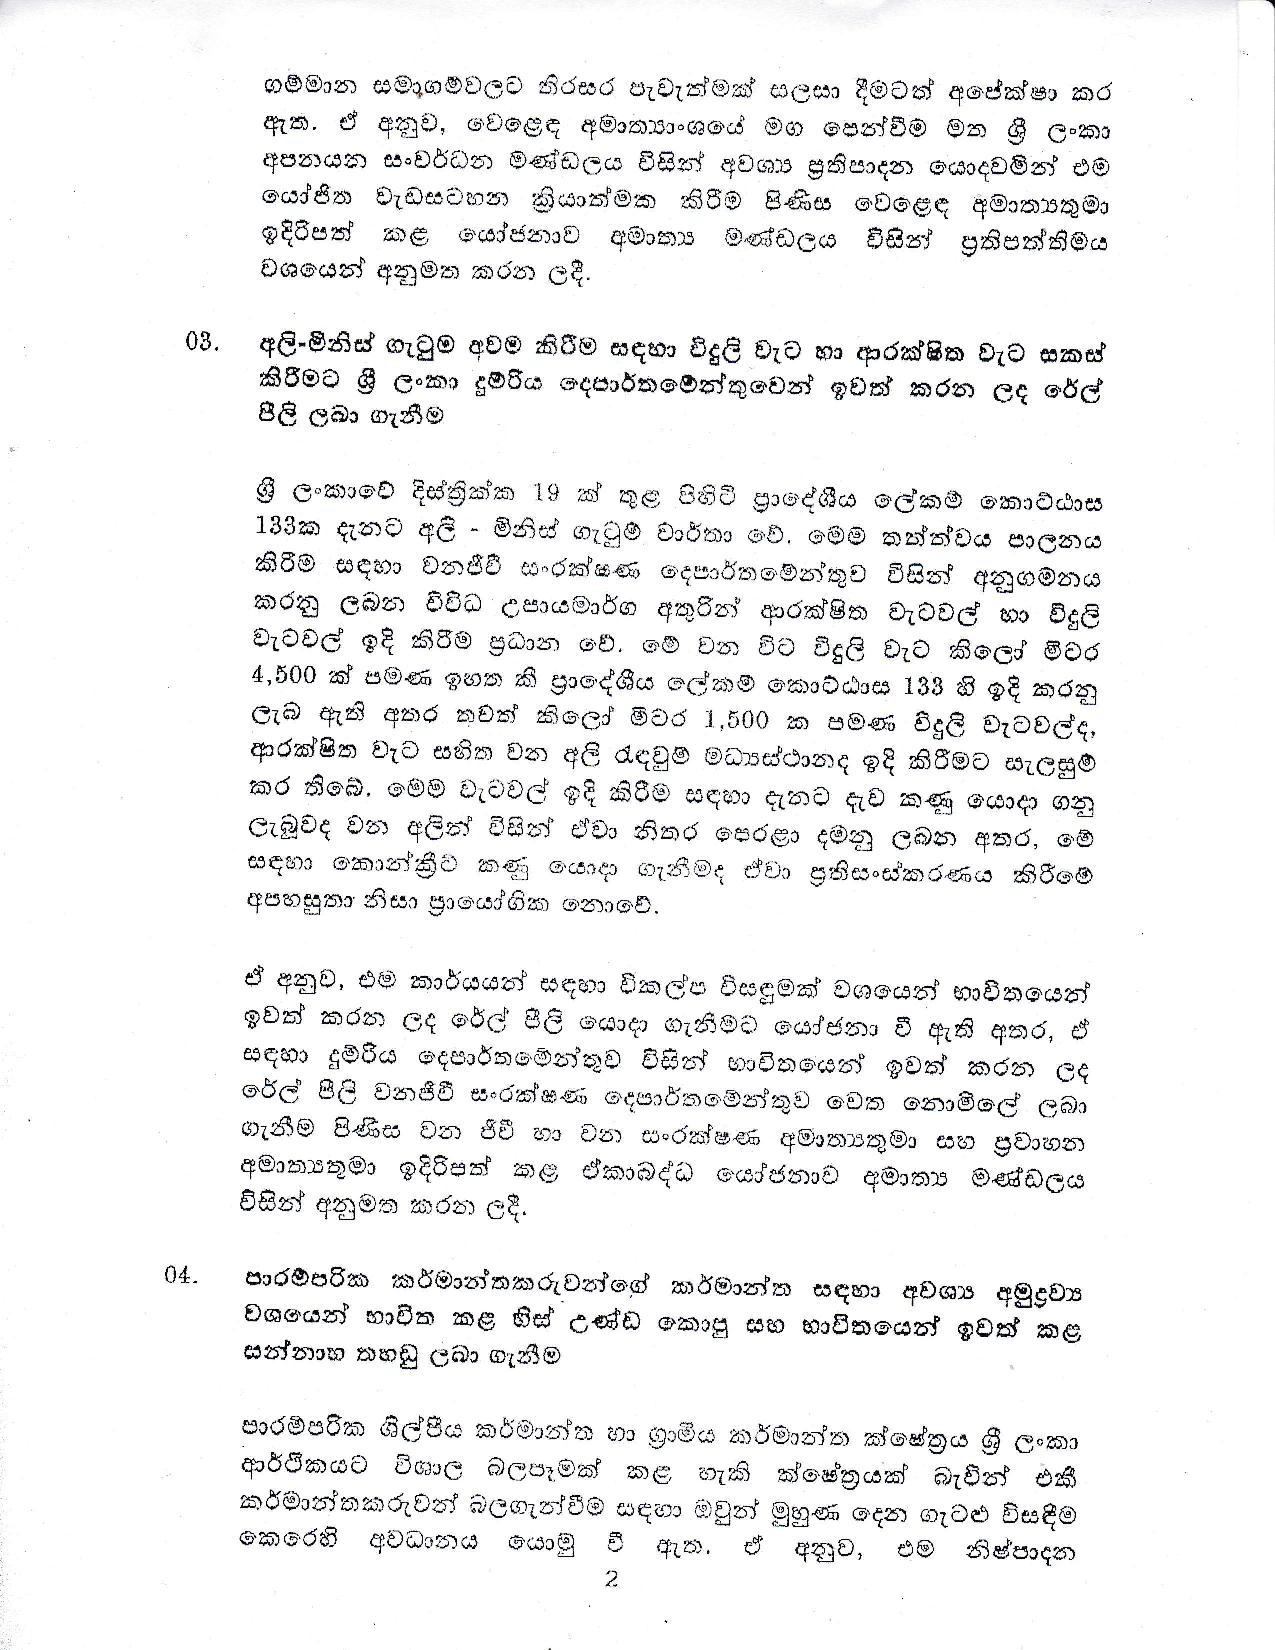 Cabinet Decision on 02.11.2020 page 002